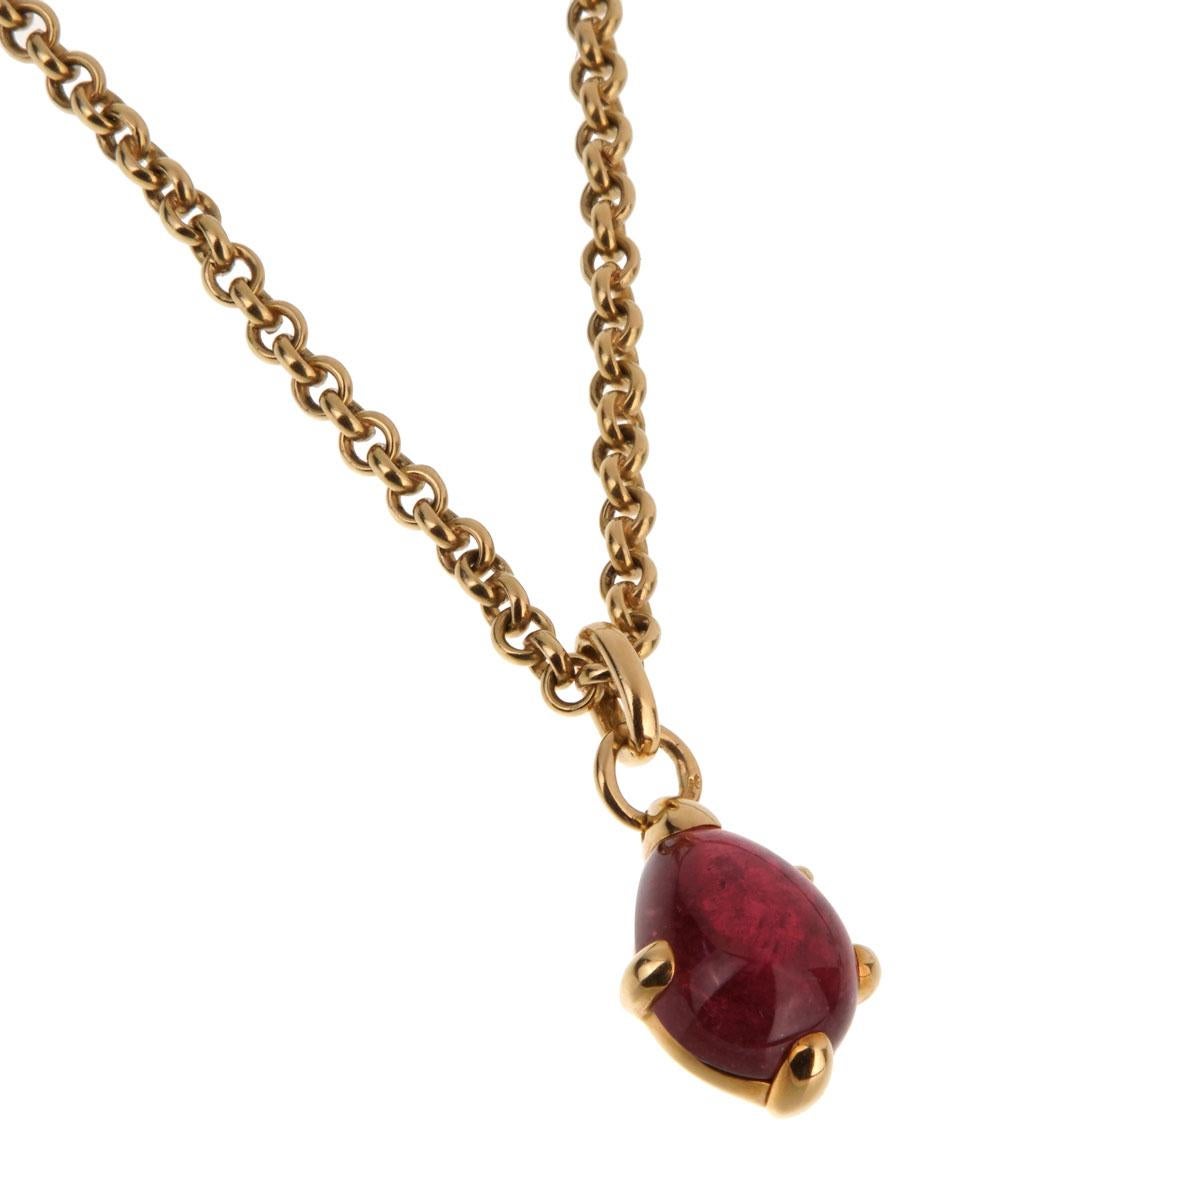 The Pomellato pink tourmaline gold chain necklace features a solid link crafted in 18kt yellow gold. At the center is a deep rose colored pink tourmaline pear shaped prong set in gold.

The necklace measures 16